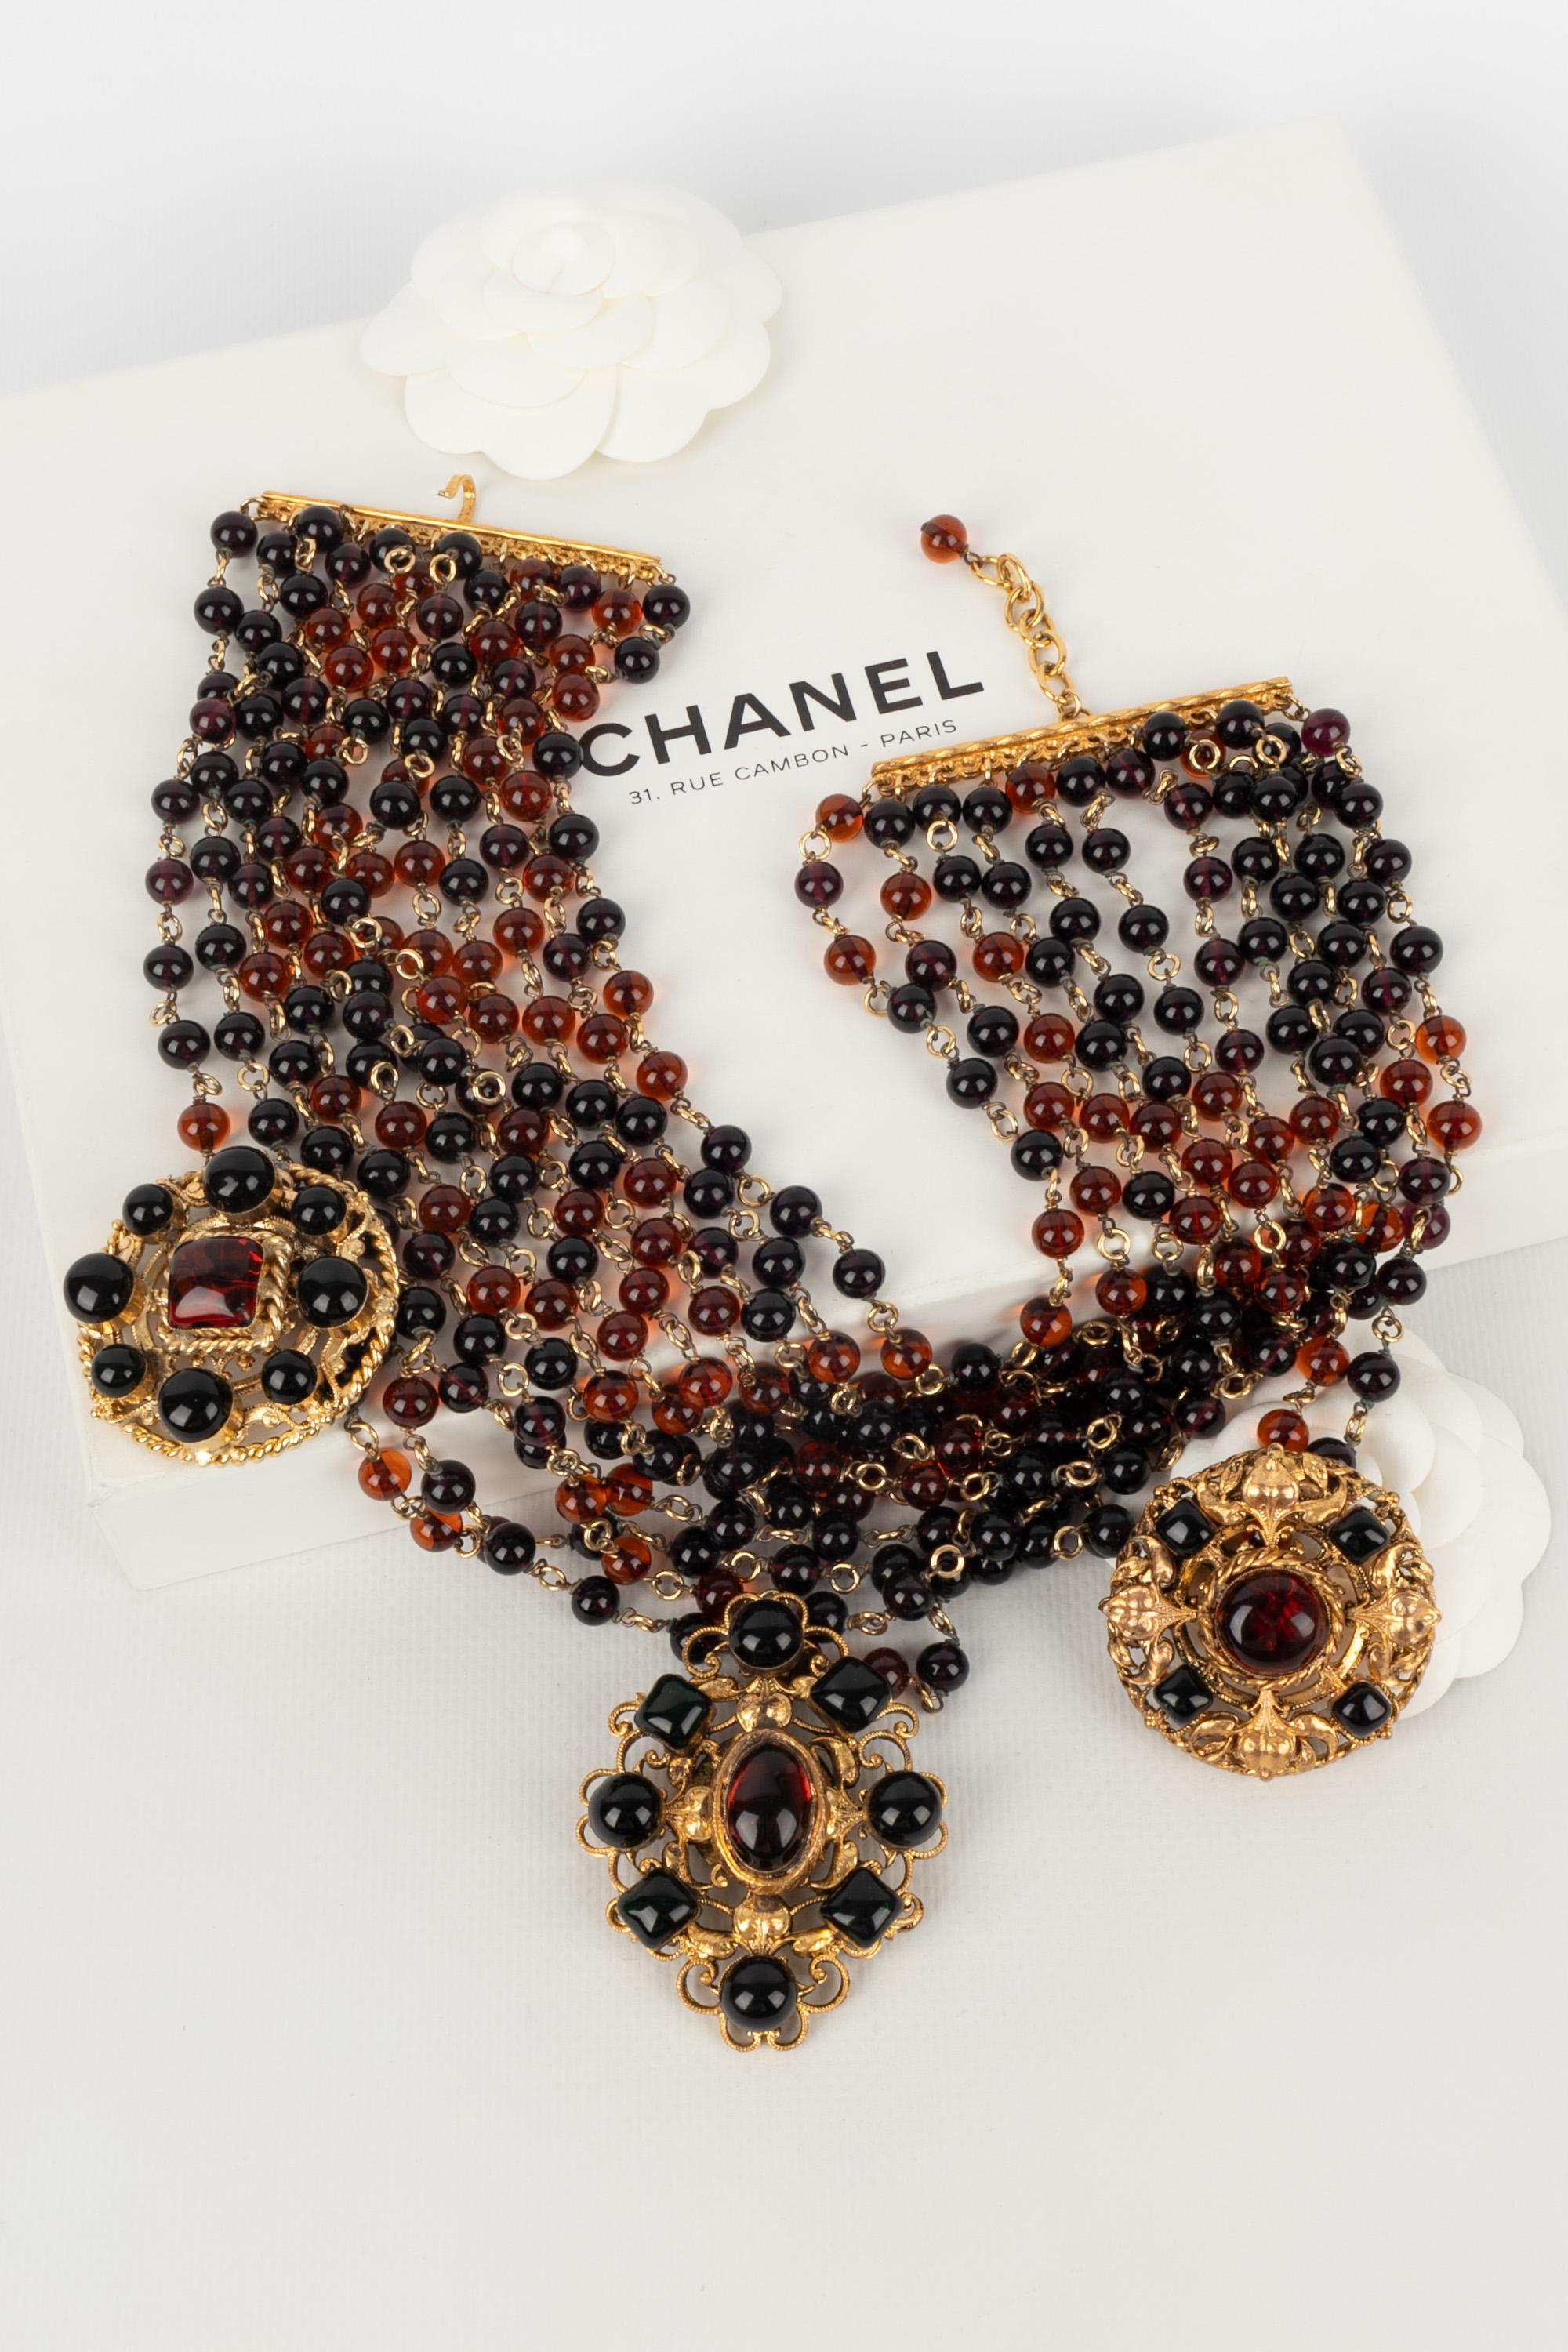 CHANEL - (Made in France) Impressive dickey necklace with multiple glass pearl rows in purple and brown tones. It comes with three golden metal pendants and a glass paste pendant.

Condition:
Very good condition

Dimensions:
Length of the shorter